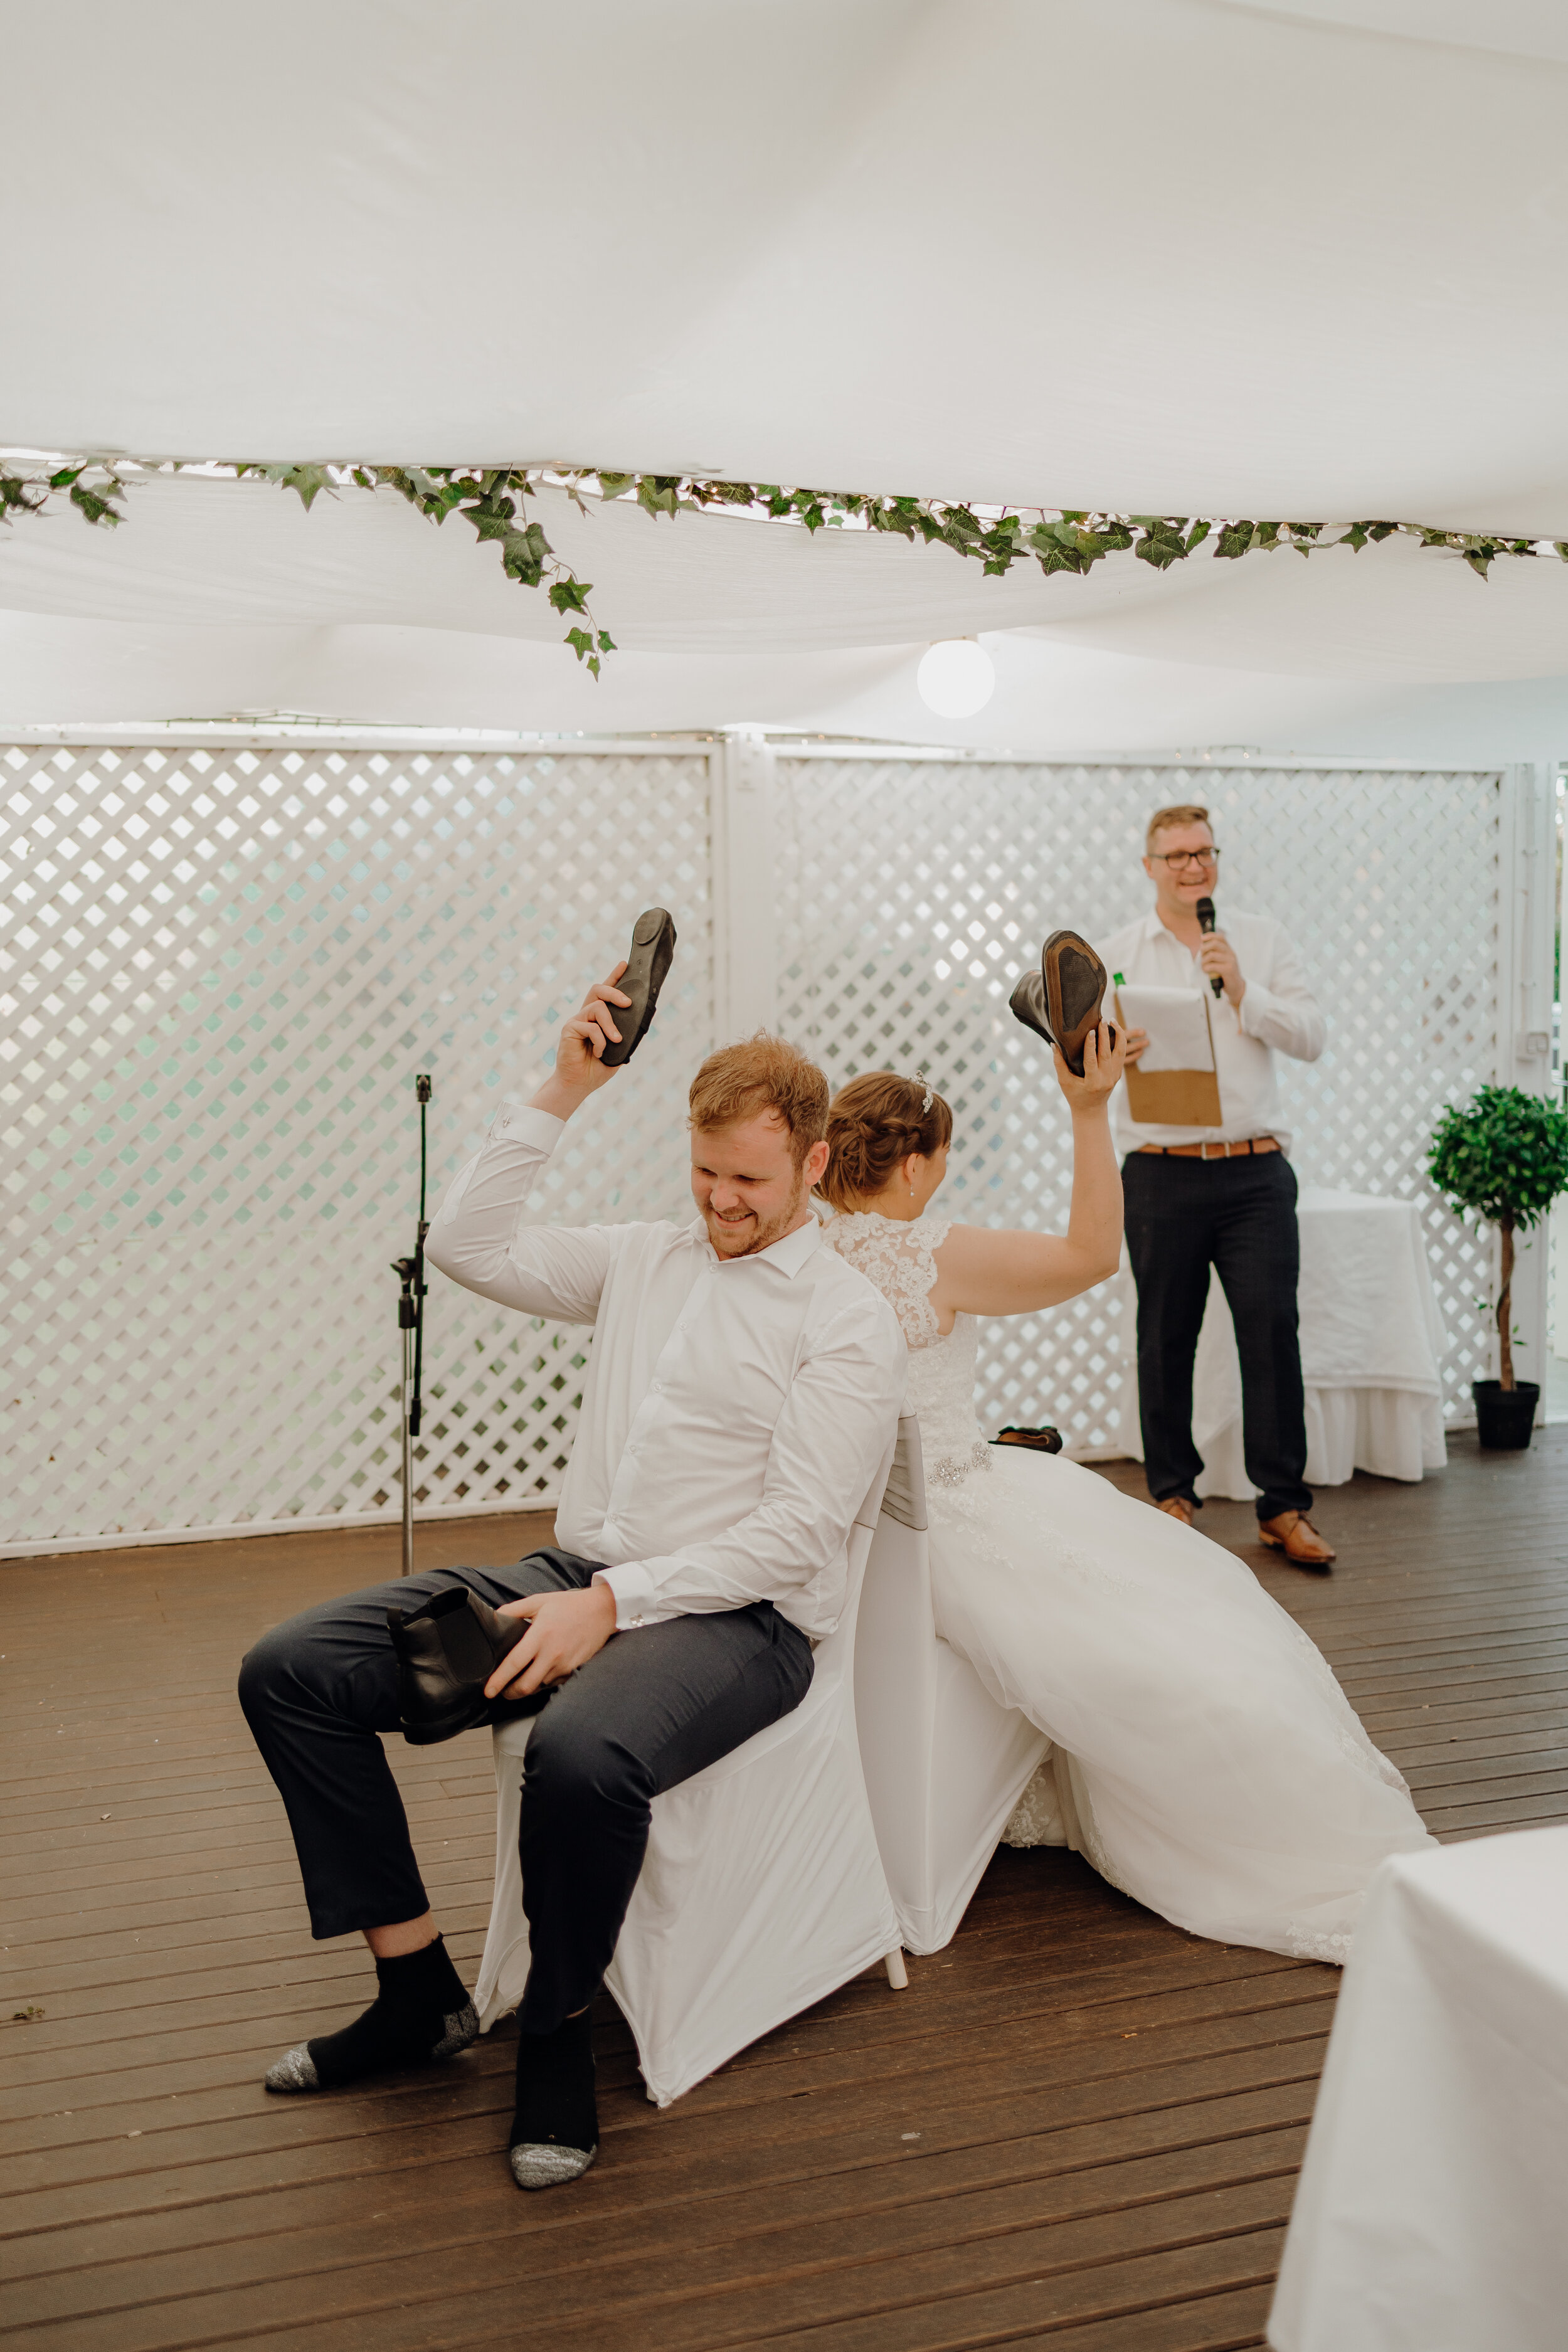 Bride and Groom playing 'The Shoe Game' at wedding reception